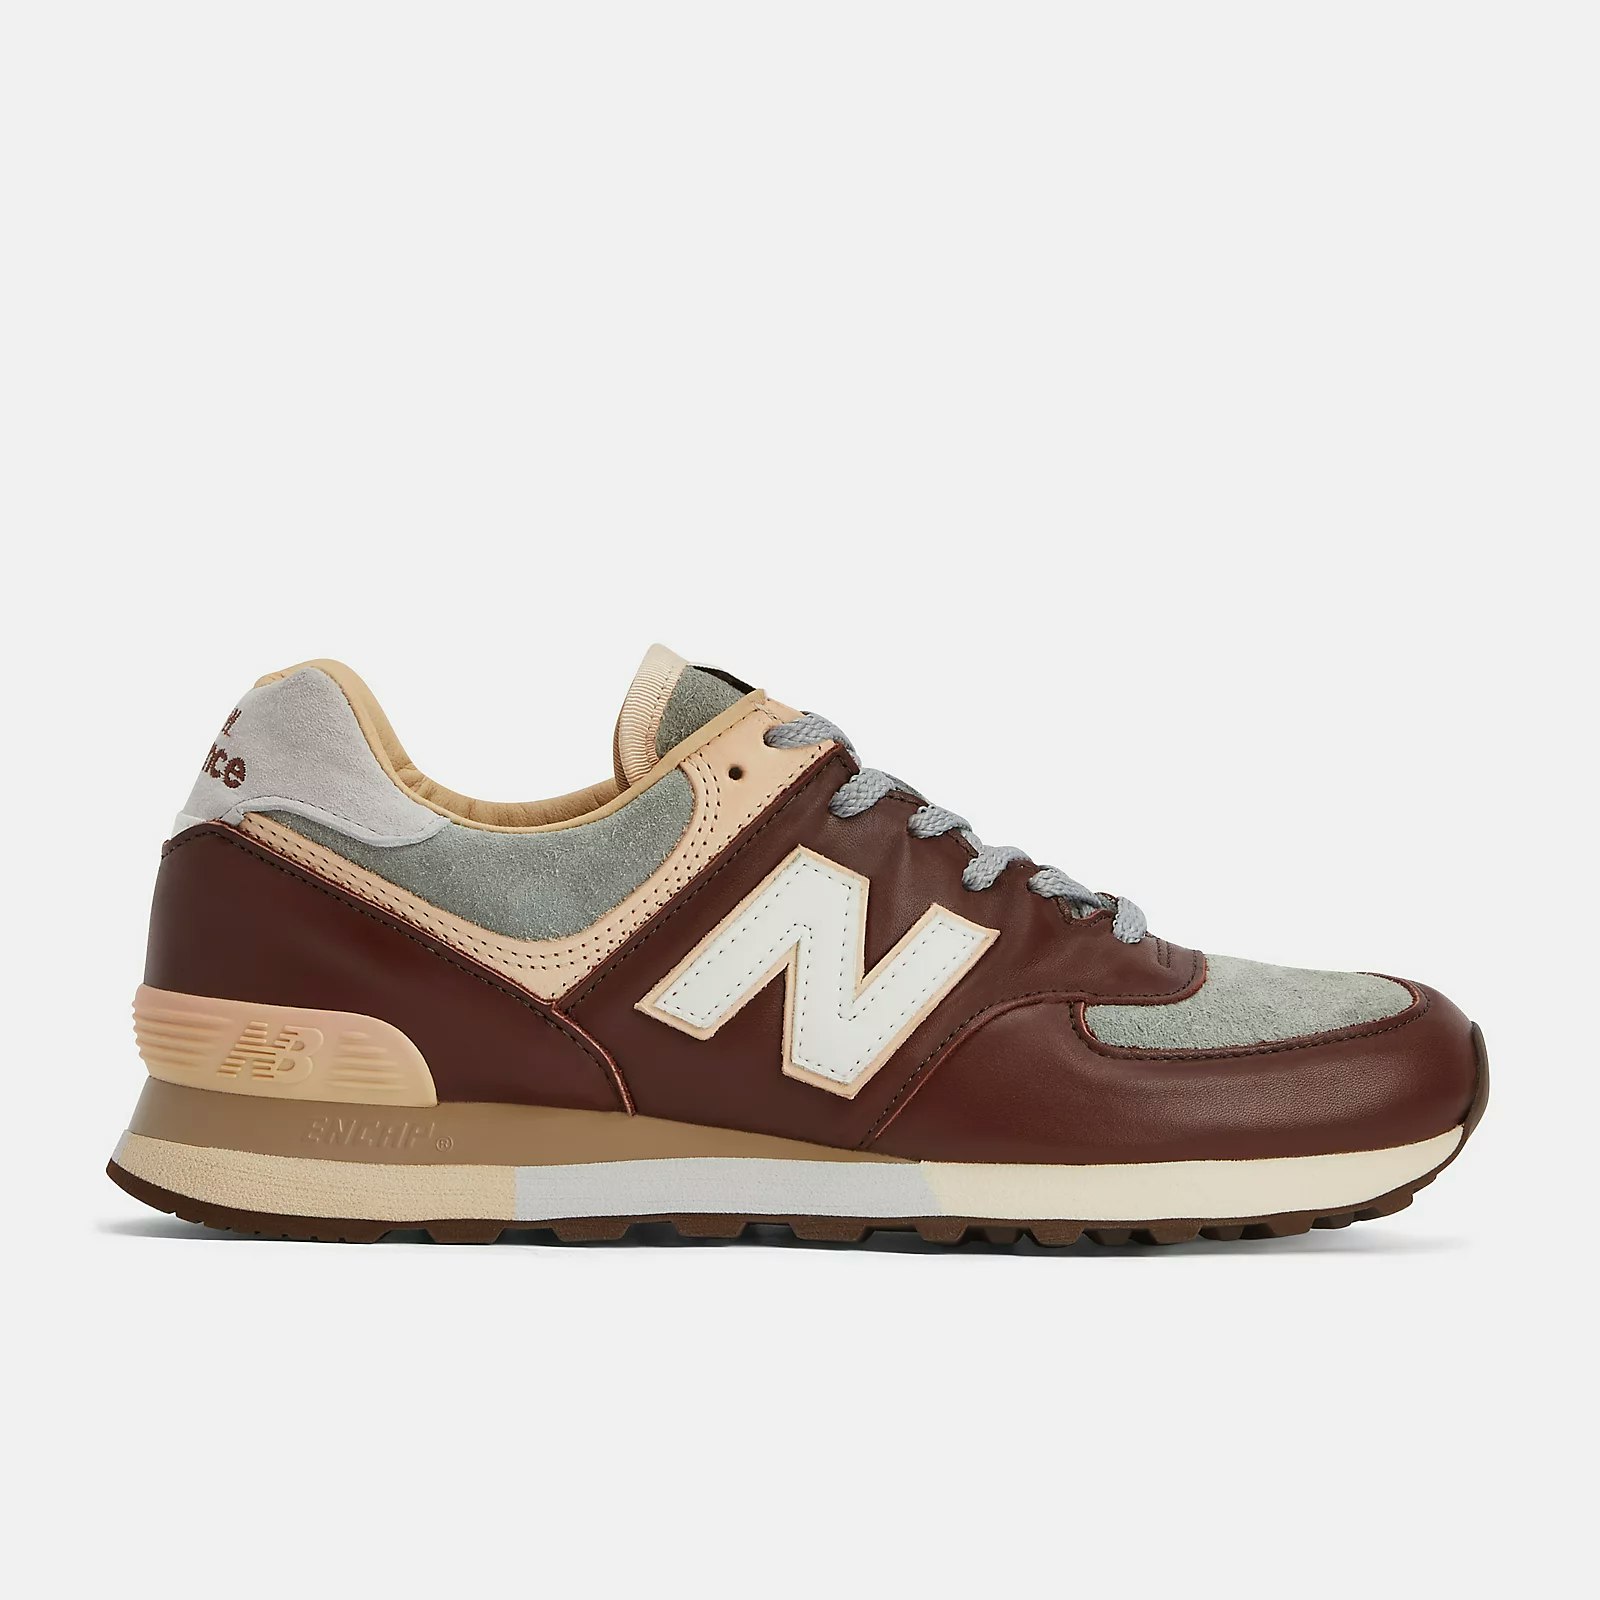 The Apartment x New Balance 576 "Made in UK" (Bitter Chocolate)